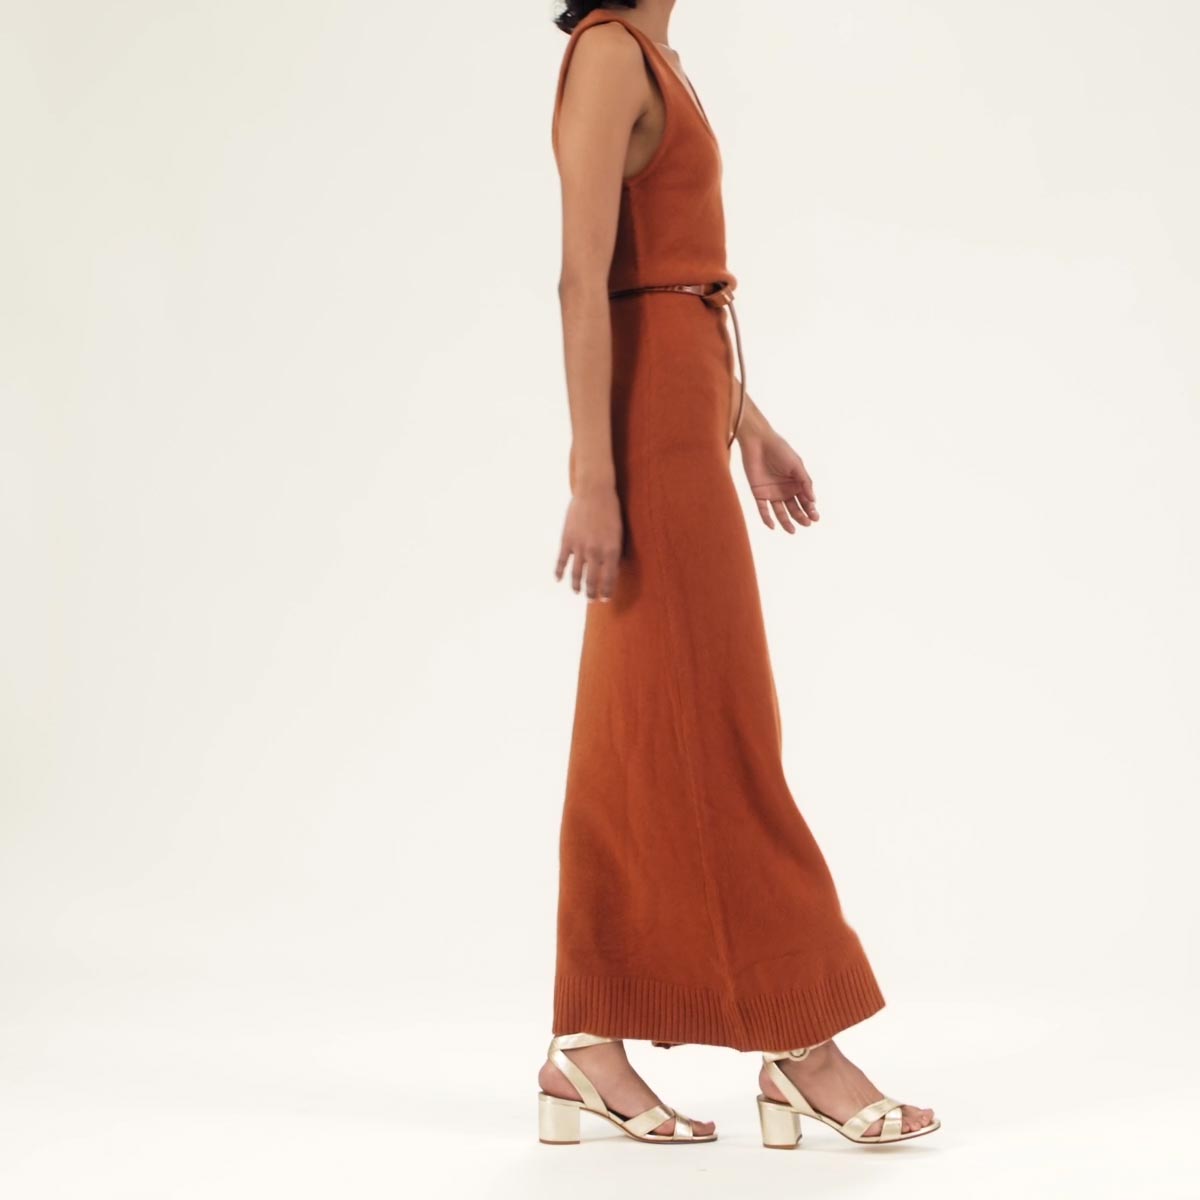 The City Sandal in Champagne Nappa shown on model styled with an orange knit sleeveless maxi dress belted around the waist.